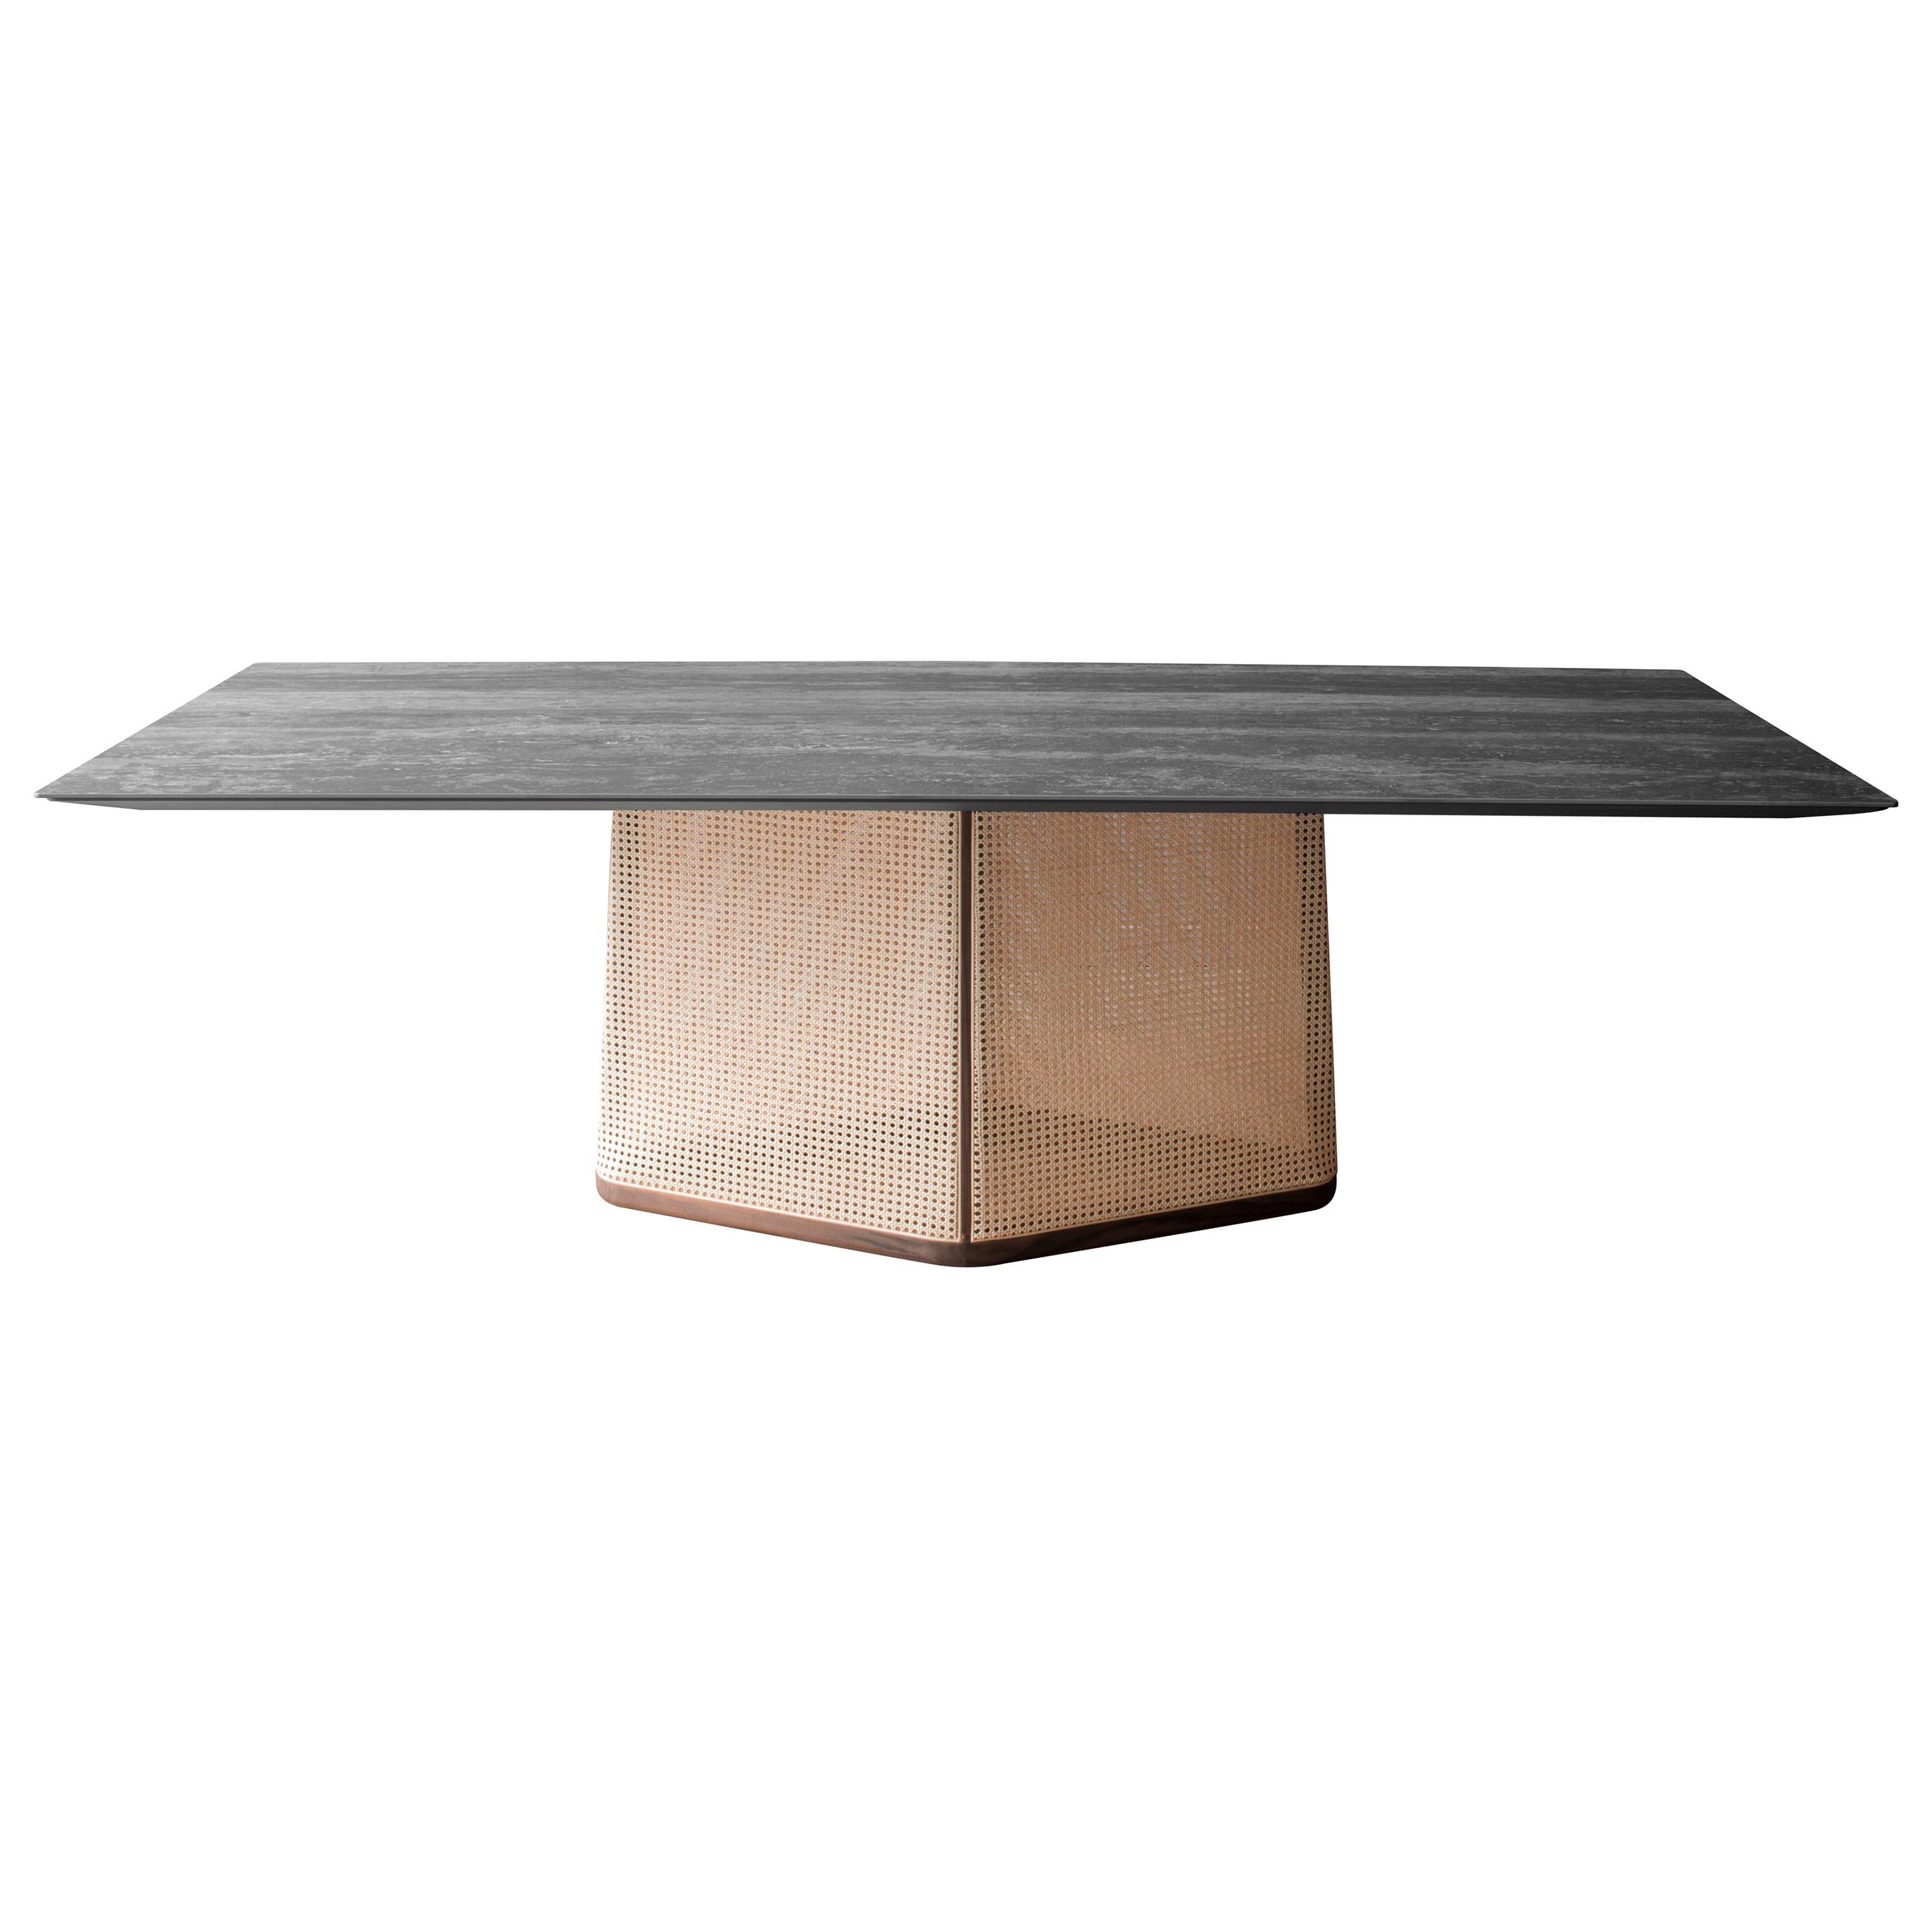 Colony Large Table in Natural Vienna Straw Base, by Skrivo Design